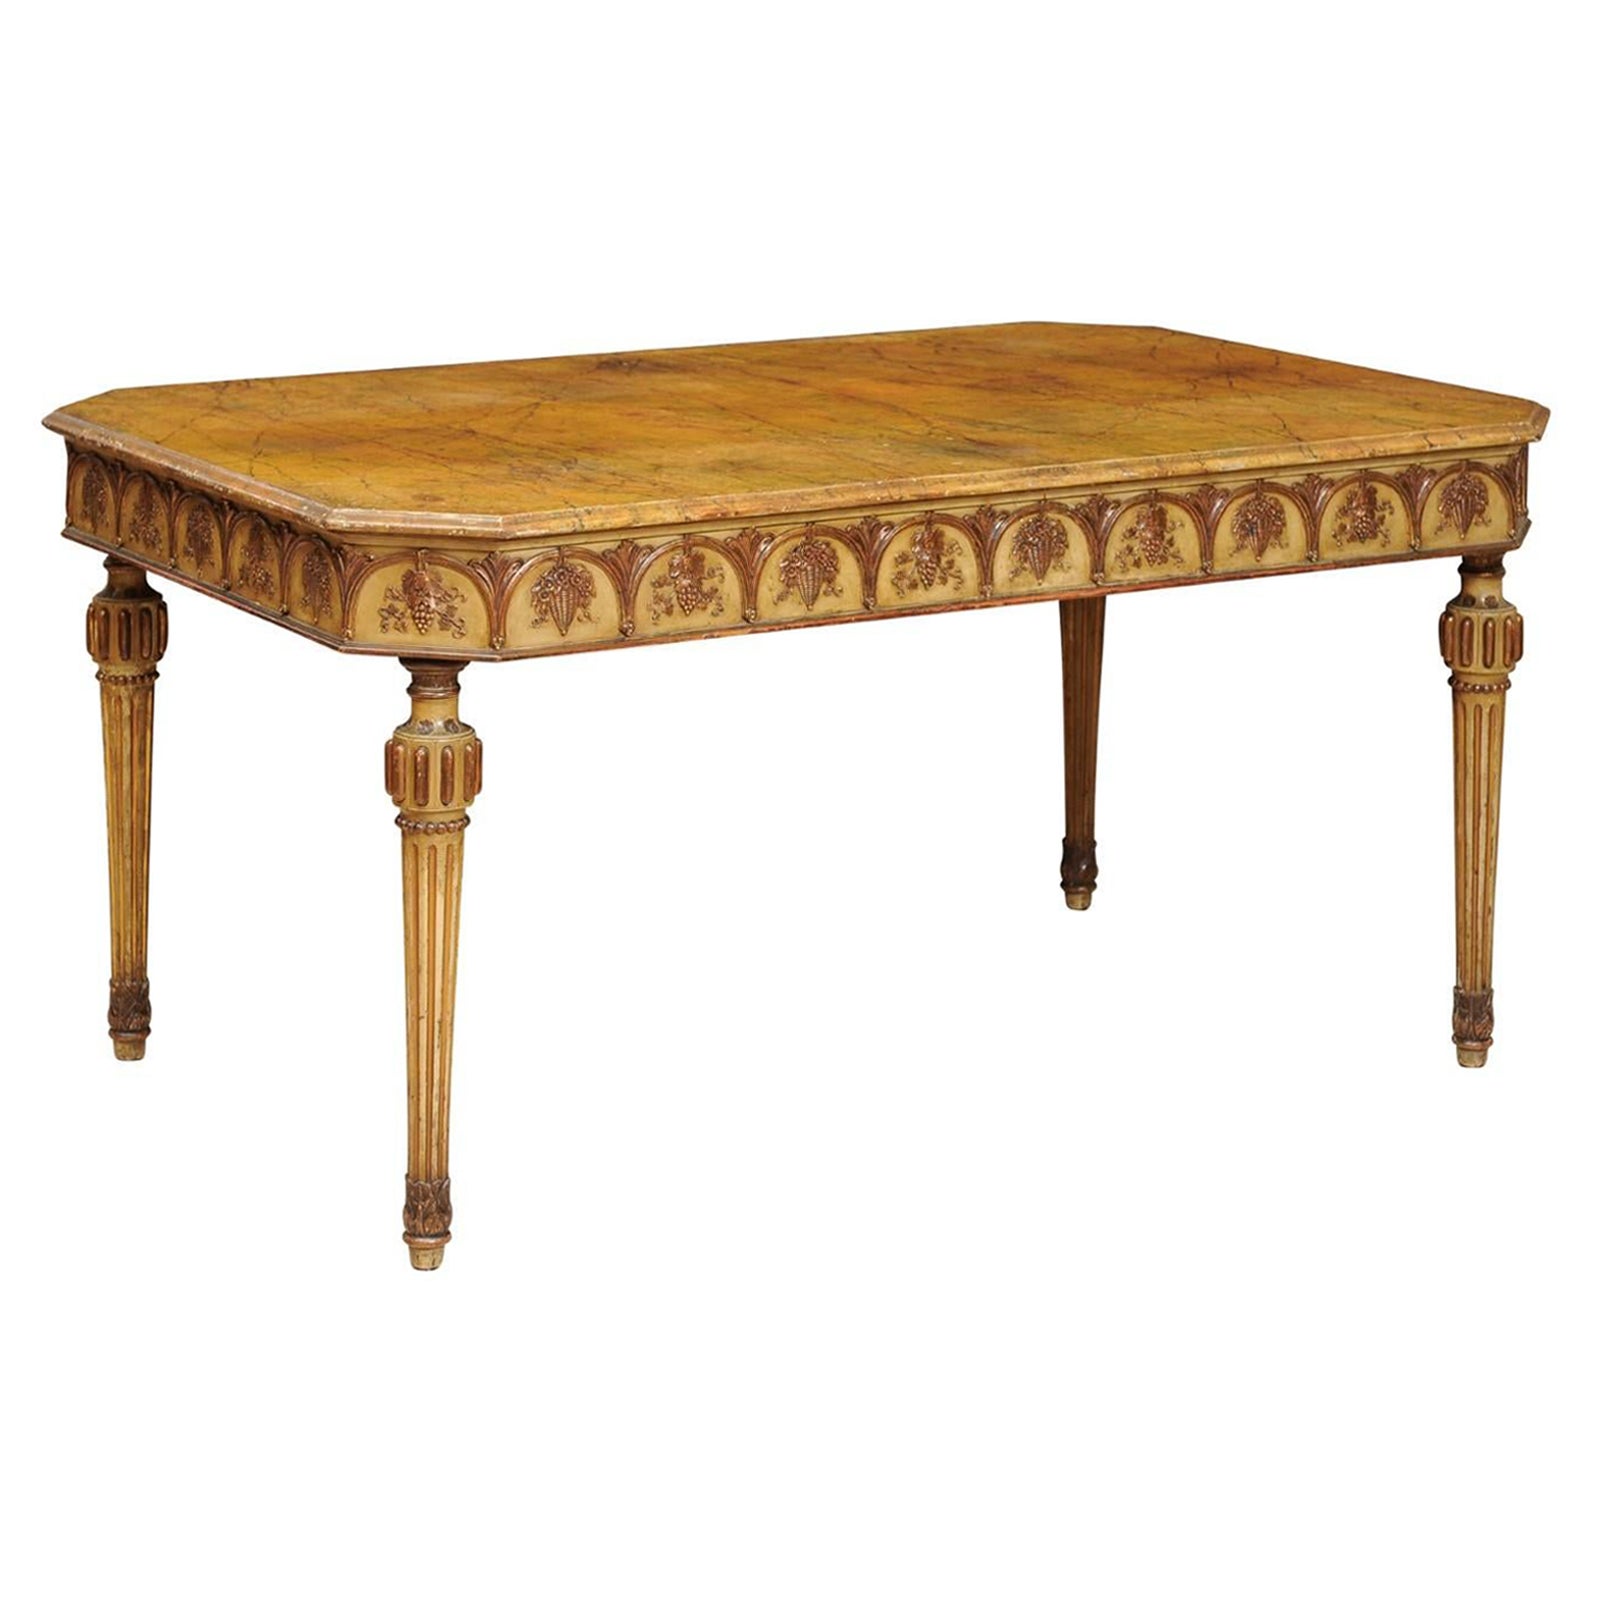 Italian Neapolitan Style Painted Dining Table with Faux Marble Top For Sale